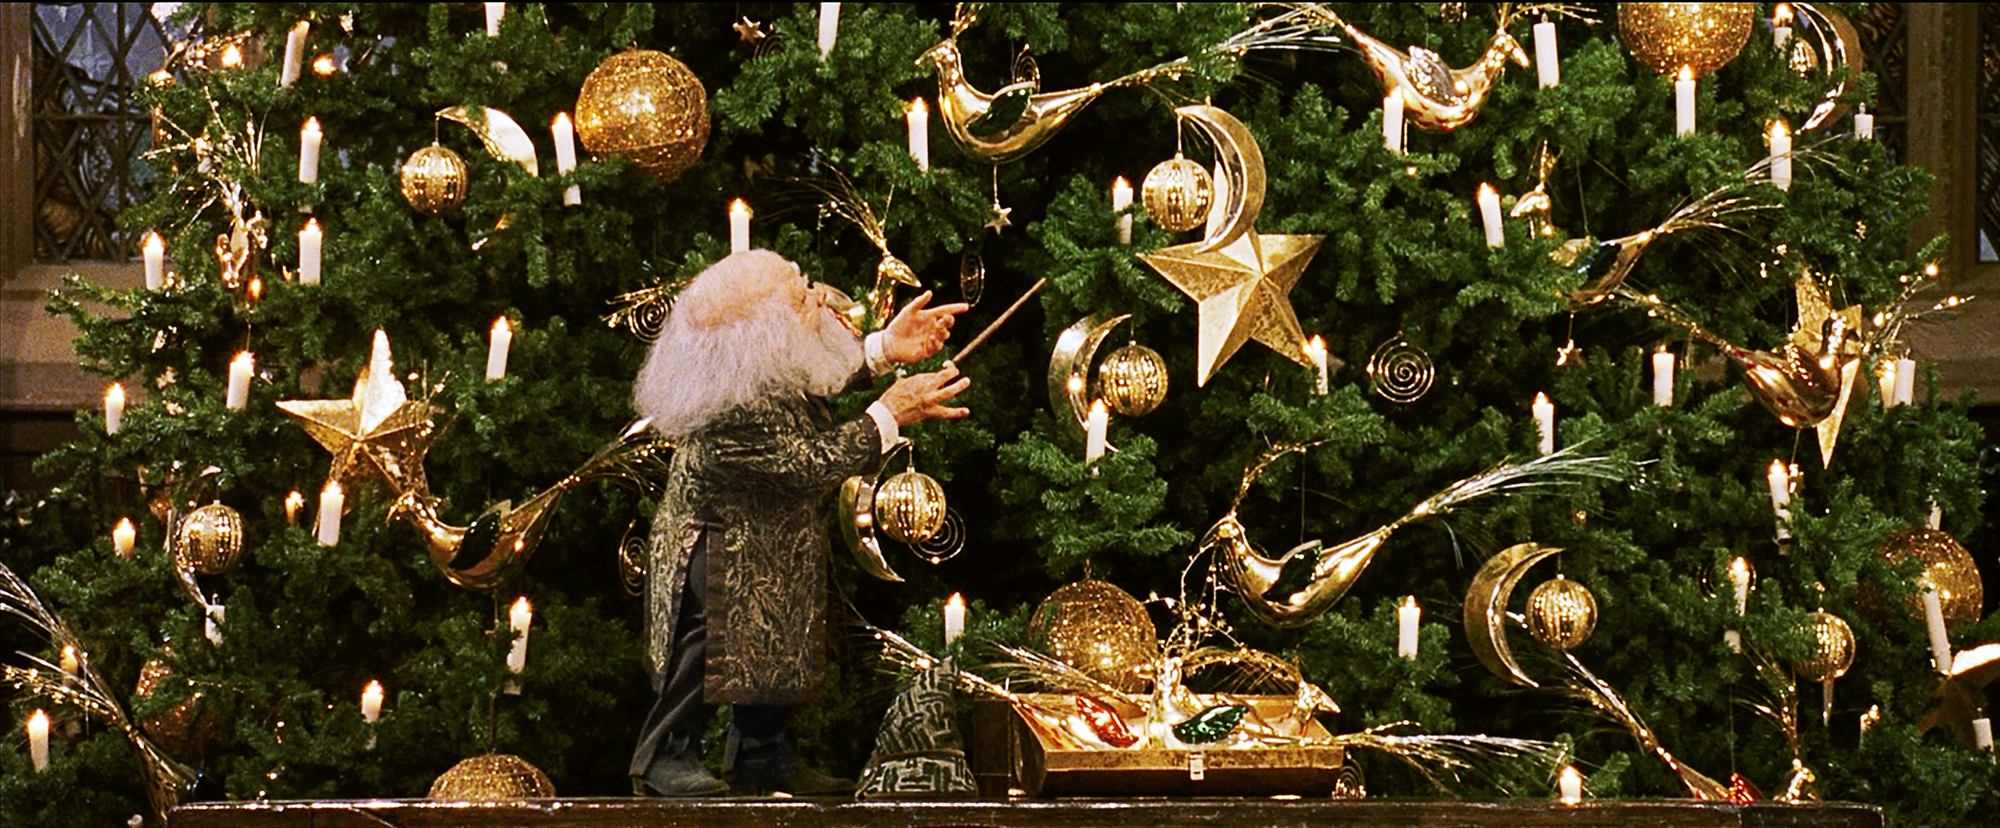 Watch: The 12 Days of Wizarding Christmas